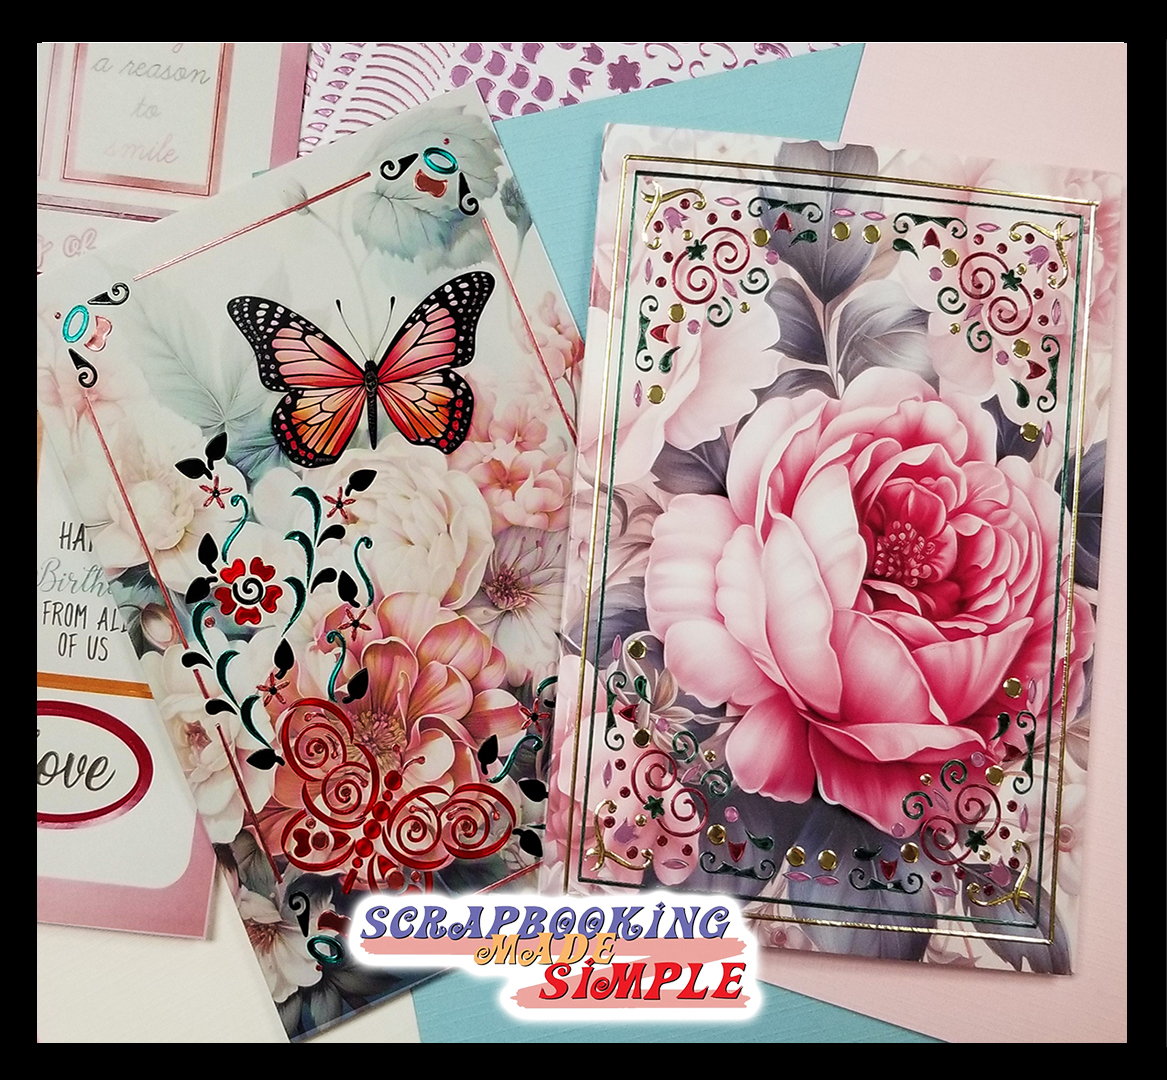 Scrapbooking Made Simple for Dies, Stamps & So Much More